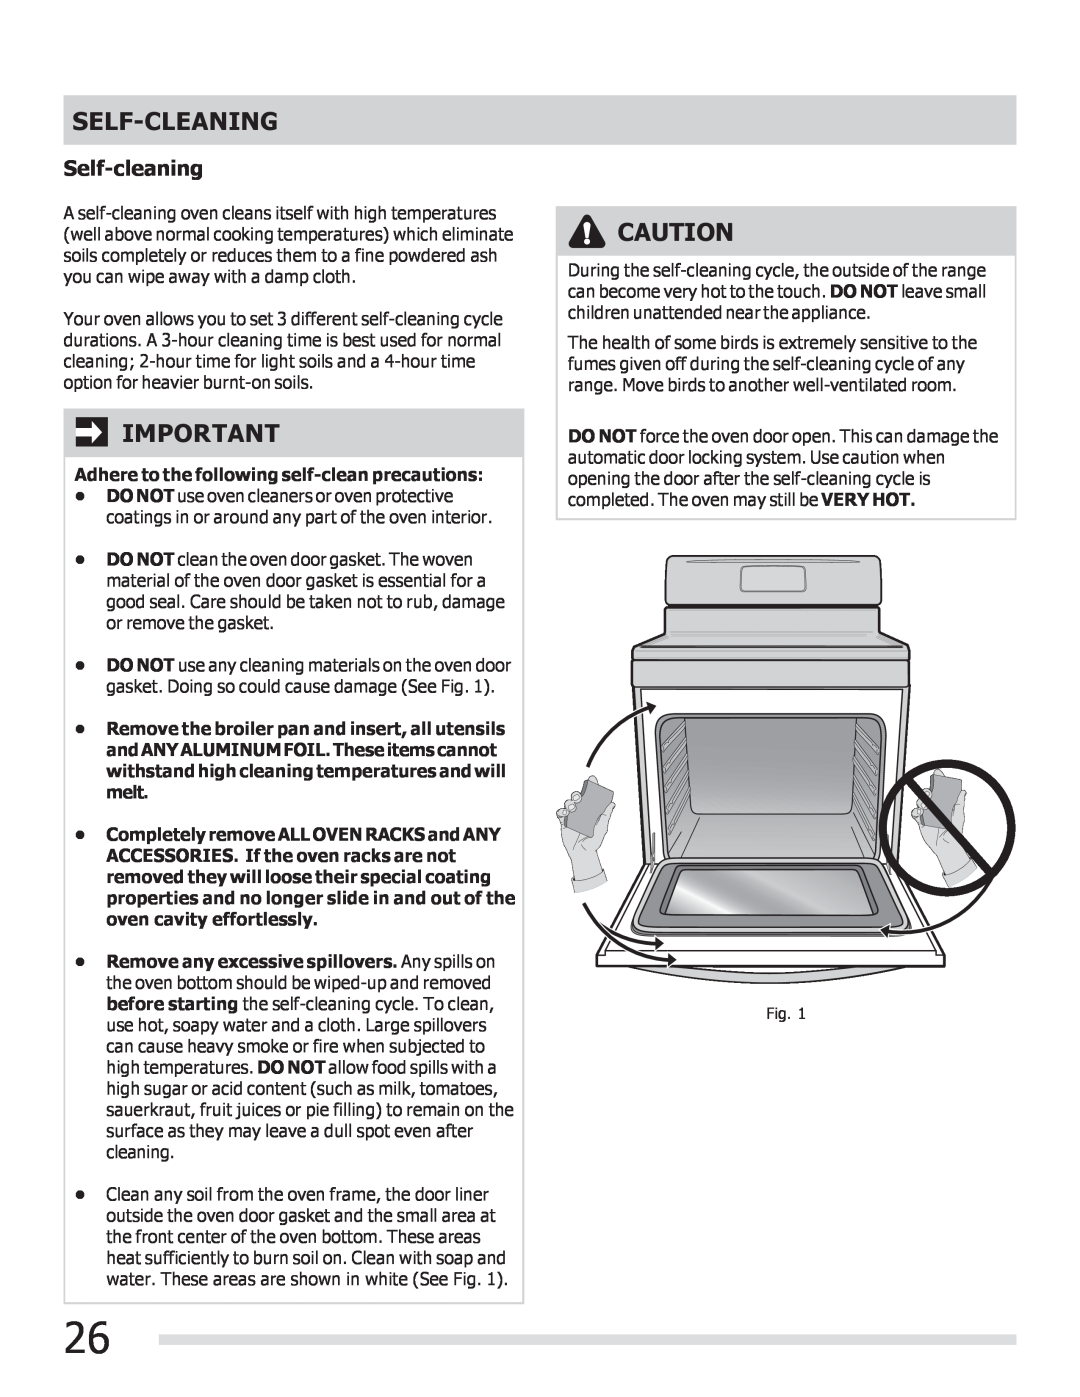 Frigidaire FGGF3056KF important safety instructions Self-Cleaning, Self-cleaning 